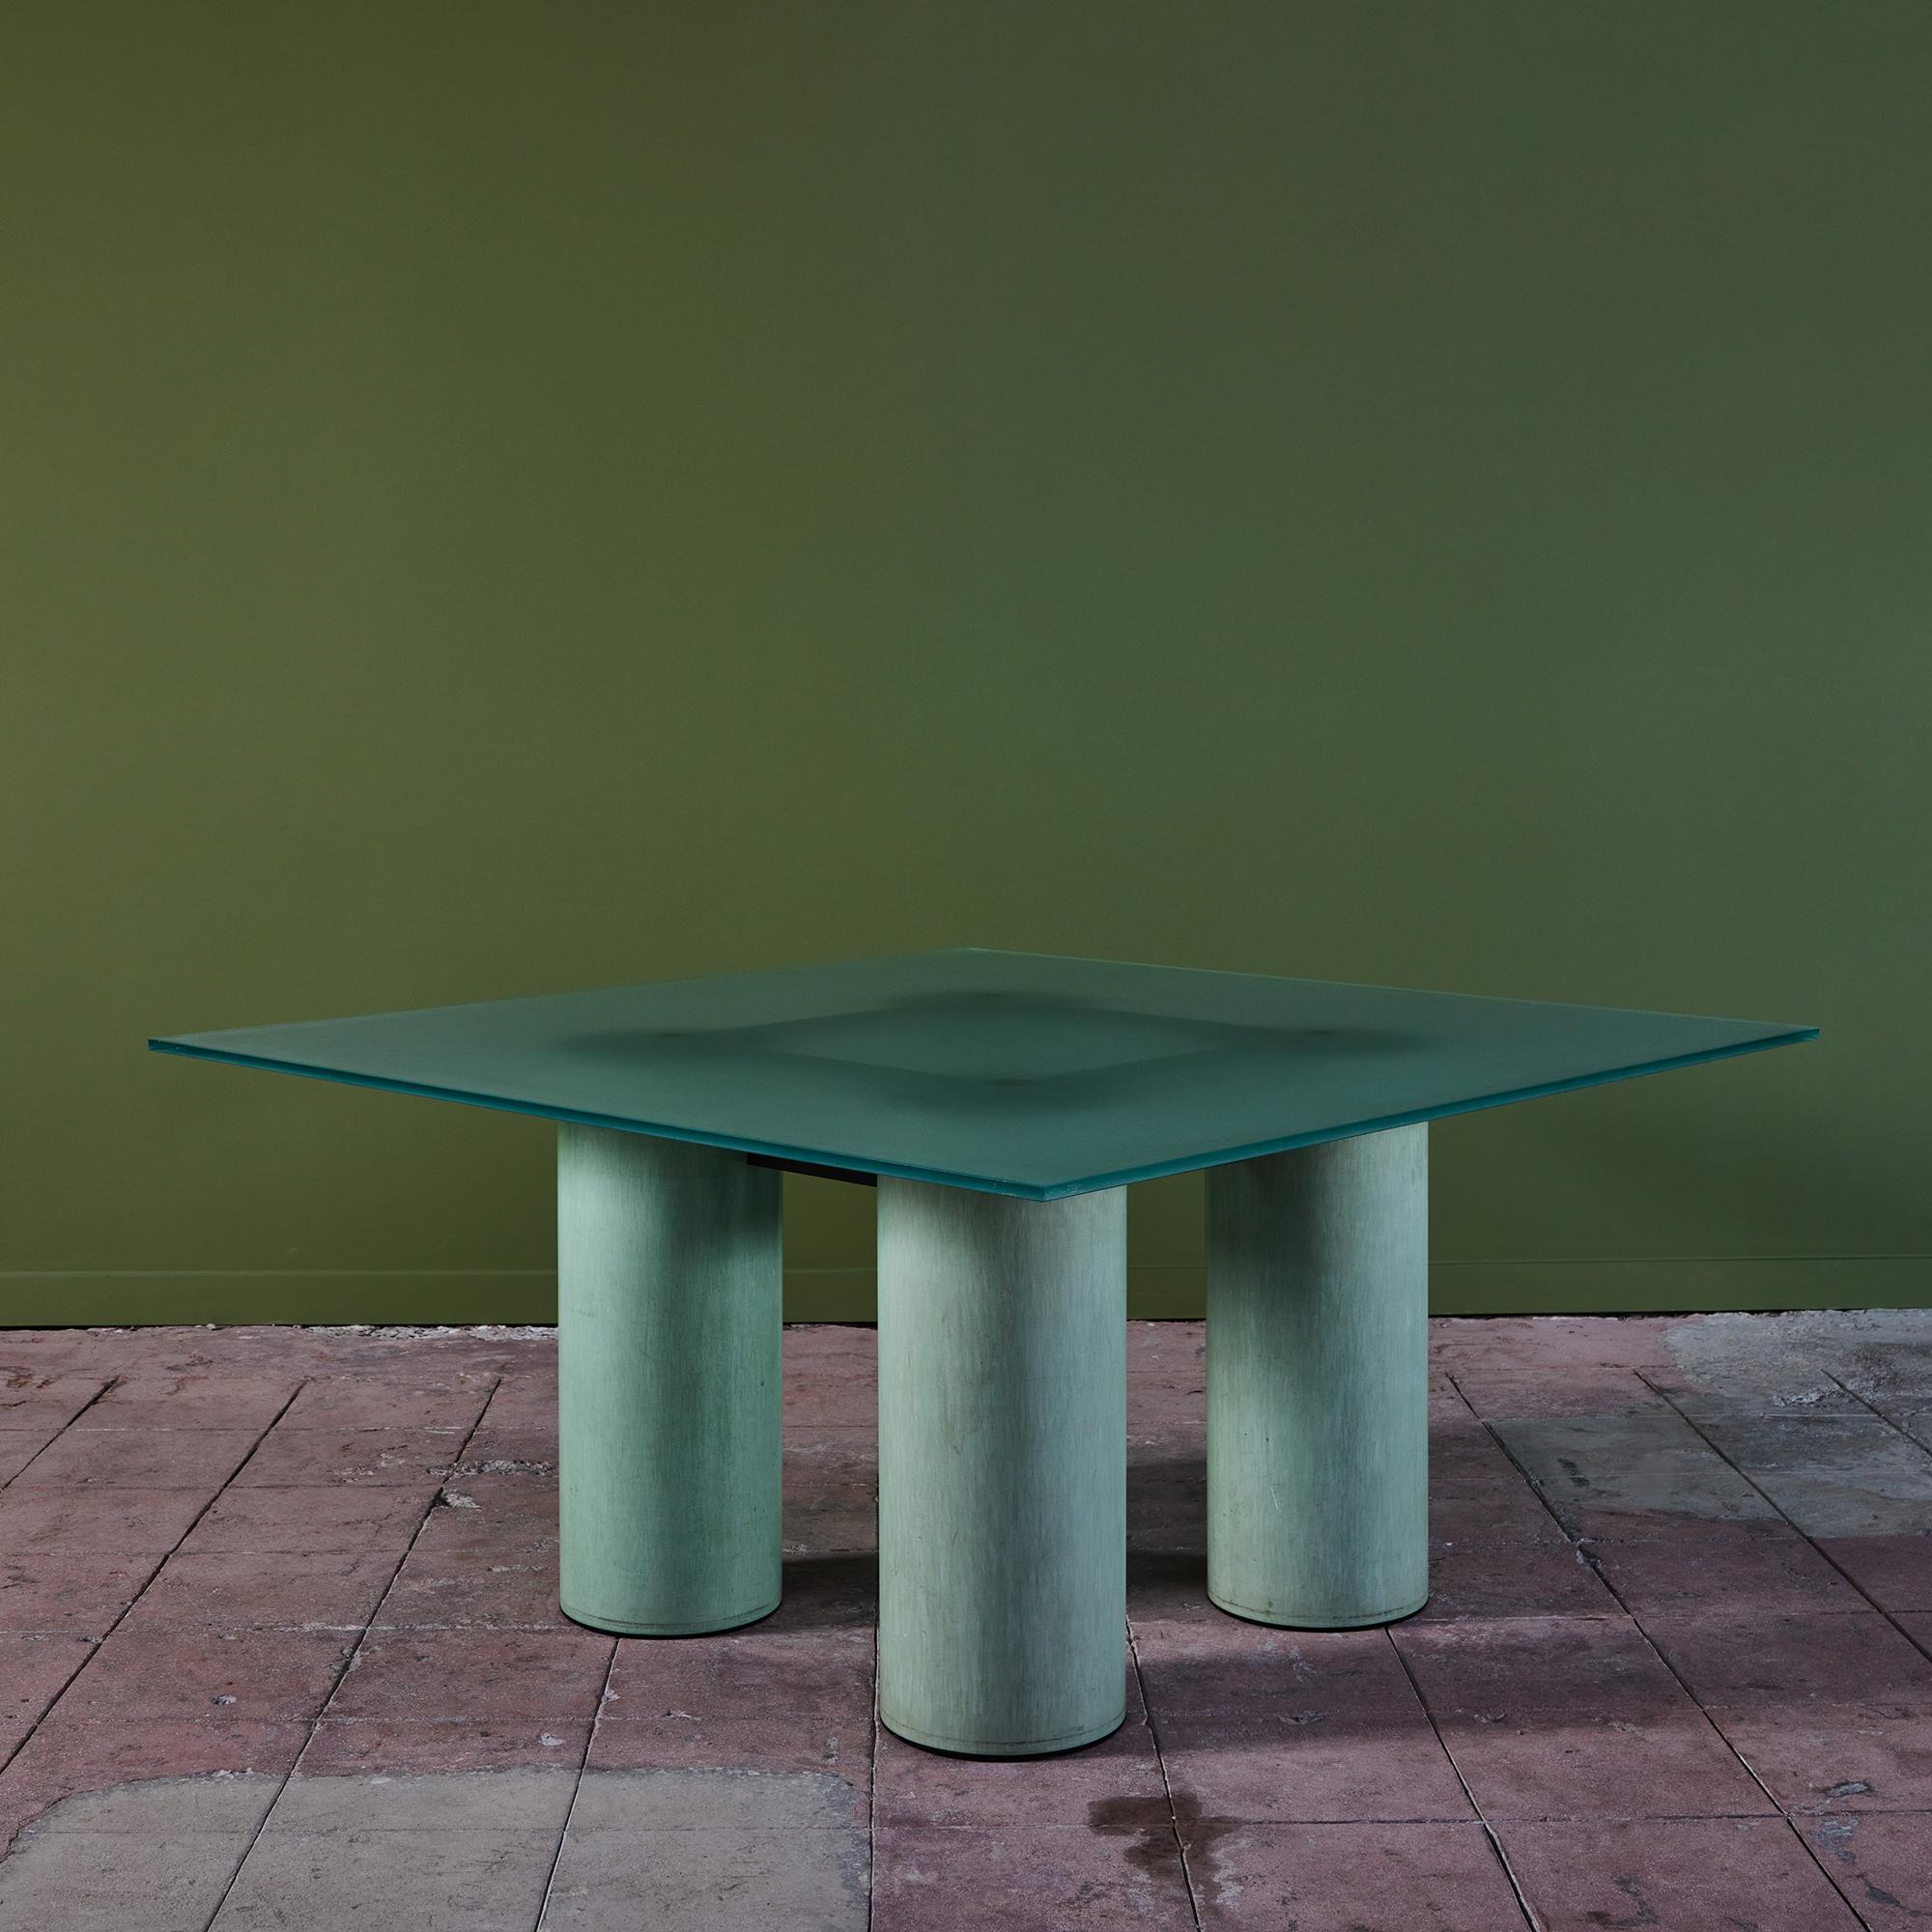 Dining table by husband and wife design duo Massimo and Lella Vignelli and David Law for Acerbis, Italy, c.1980s. The square dining table features a frosted glass table top and four steel cylindrical legs finished in a beautiful applied turquoise